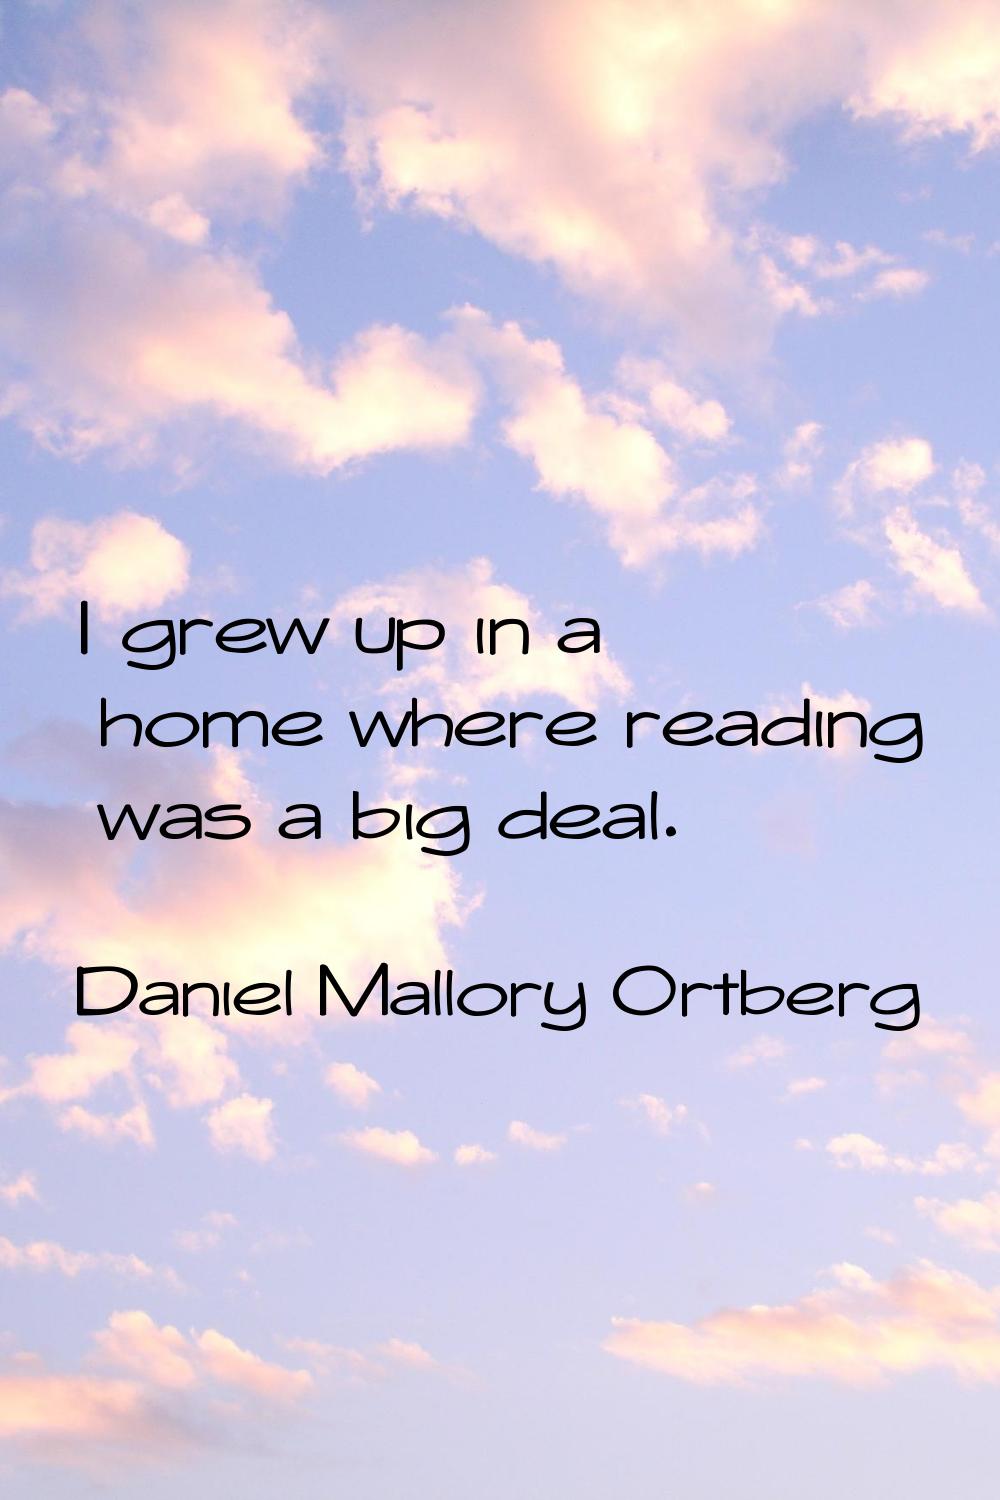 I grew up in a home where reading was a big deal.